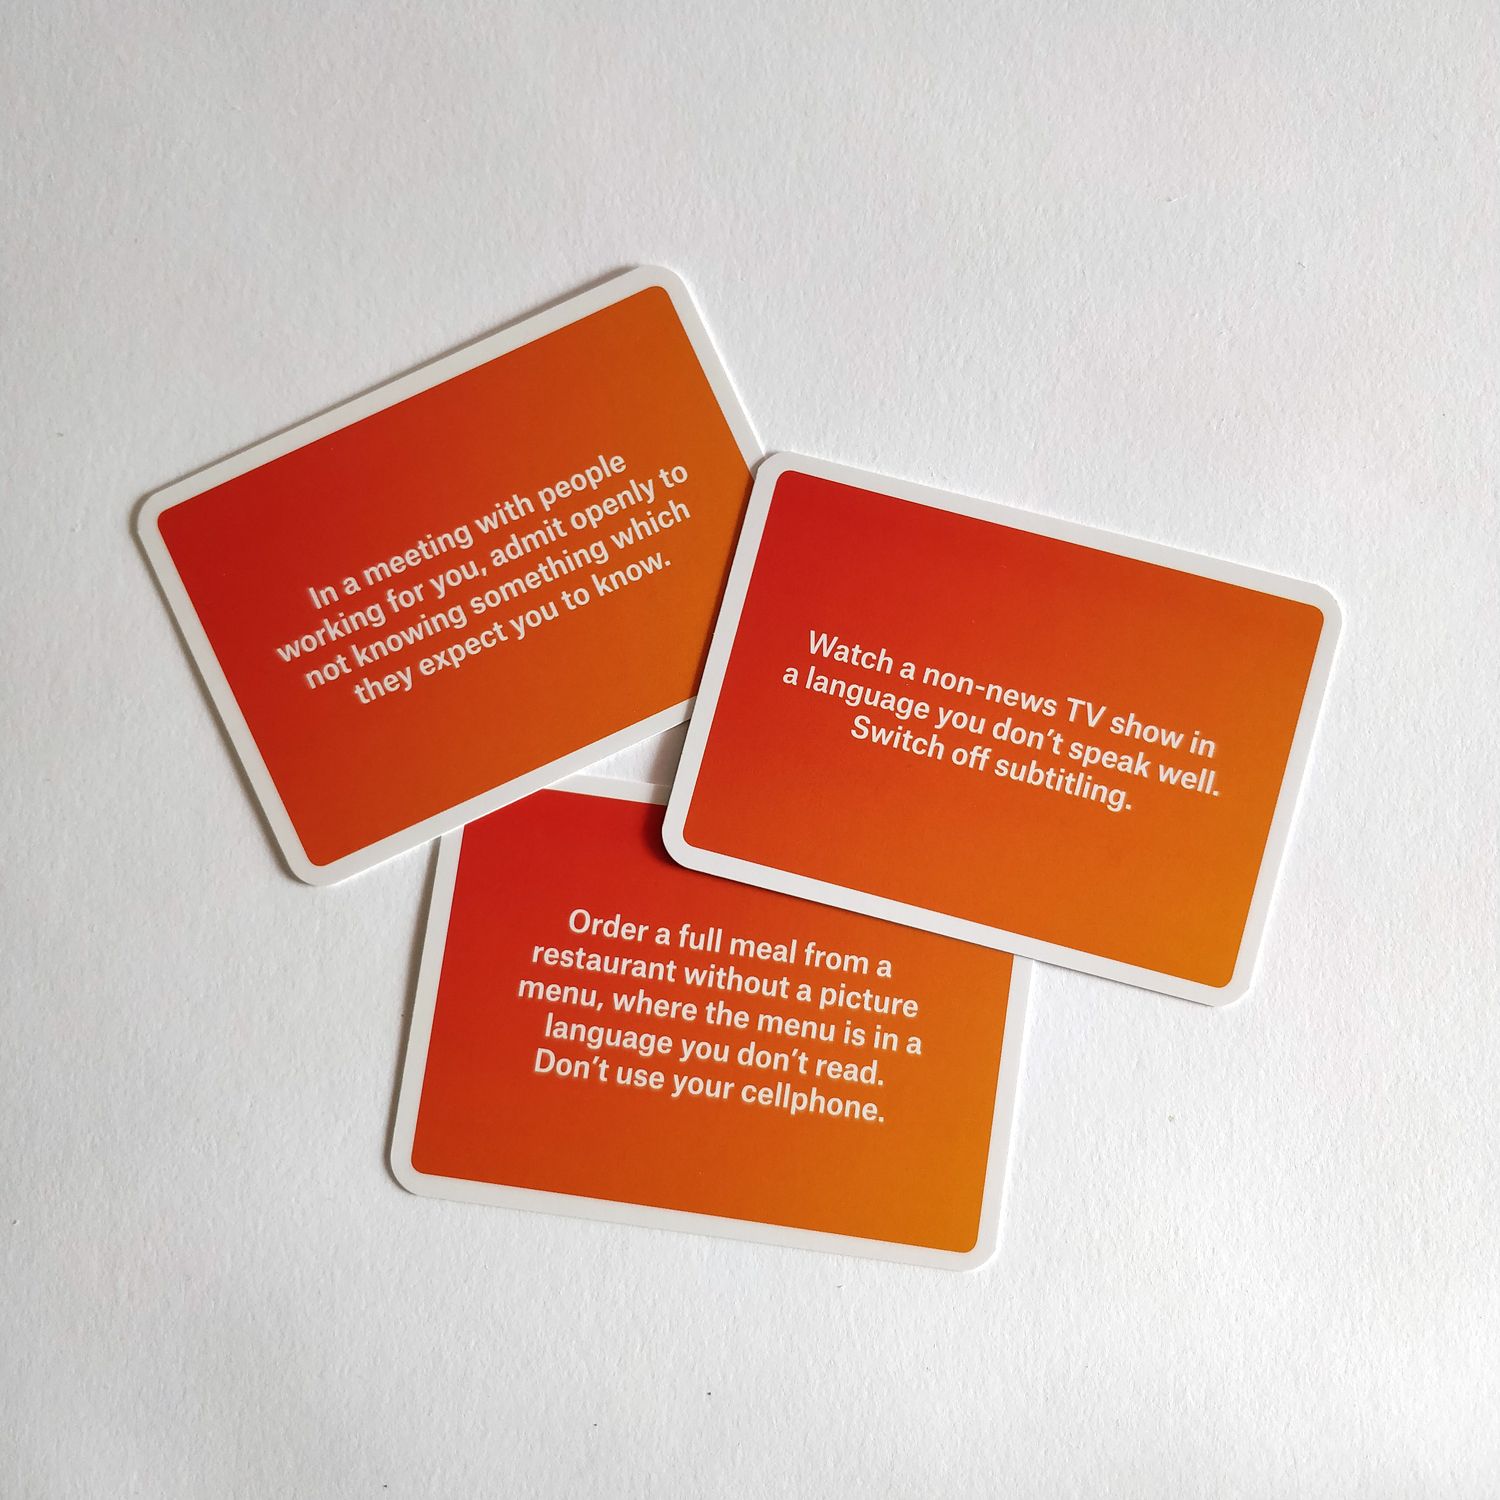 The idk prompt cards